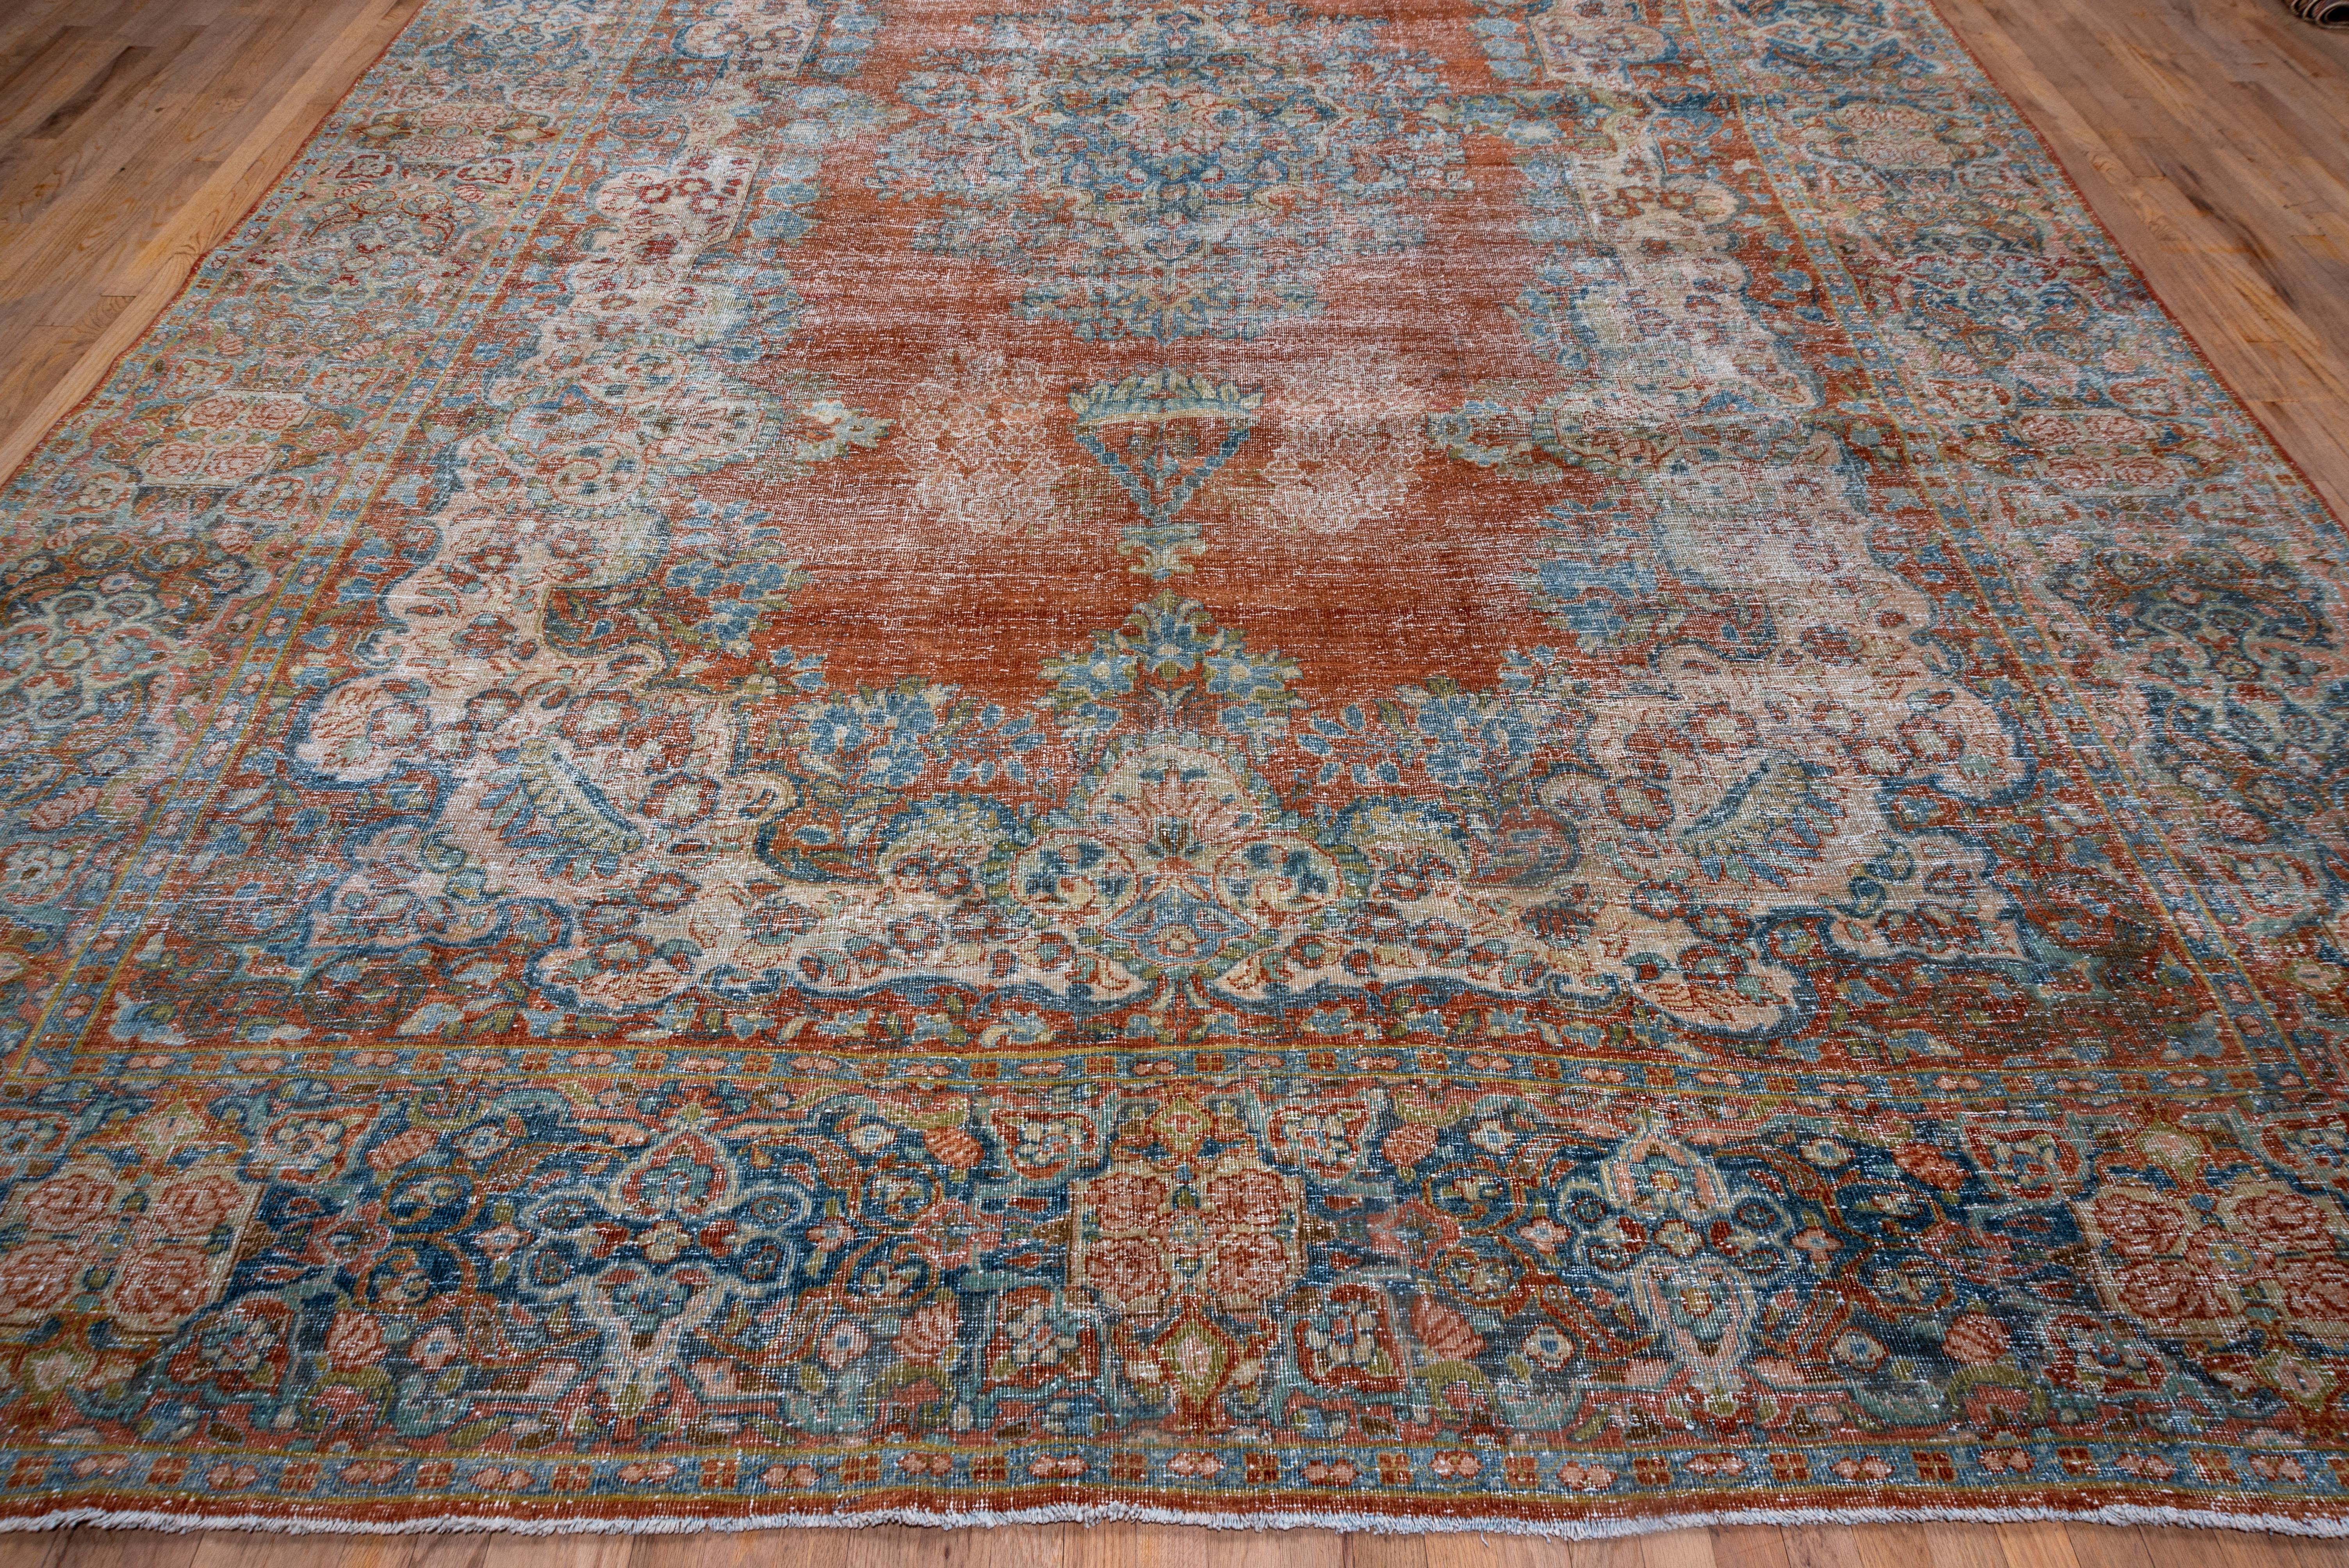 This rust field west Persian village carpet shows an unusual sand wreath pattern around the slate medallion. Boteh-shaped flower clusres decorate the field as well. The slate border shows sandy quatrefoils enclosing roses.
   